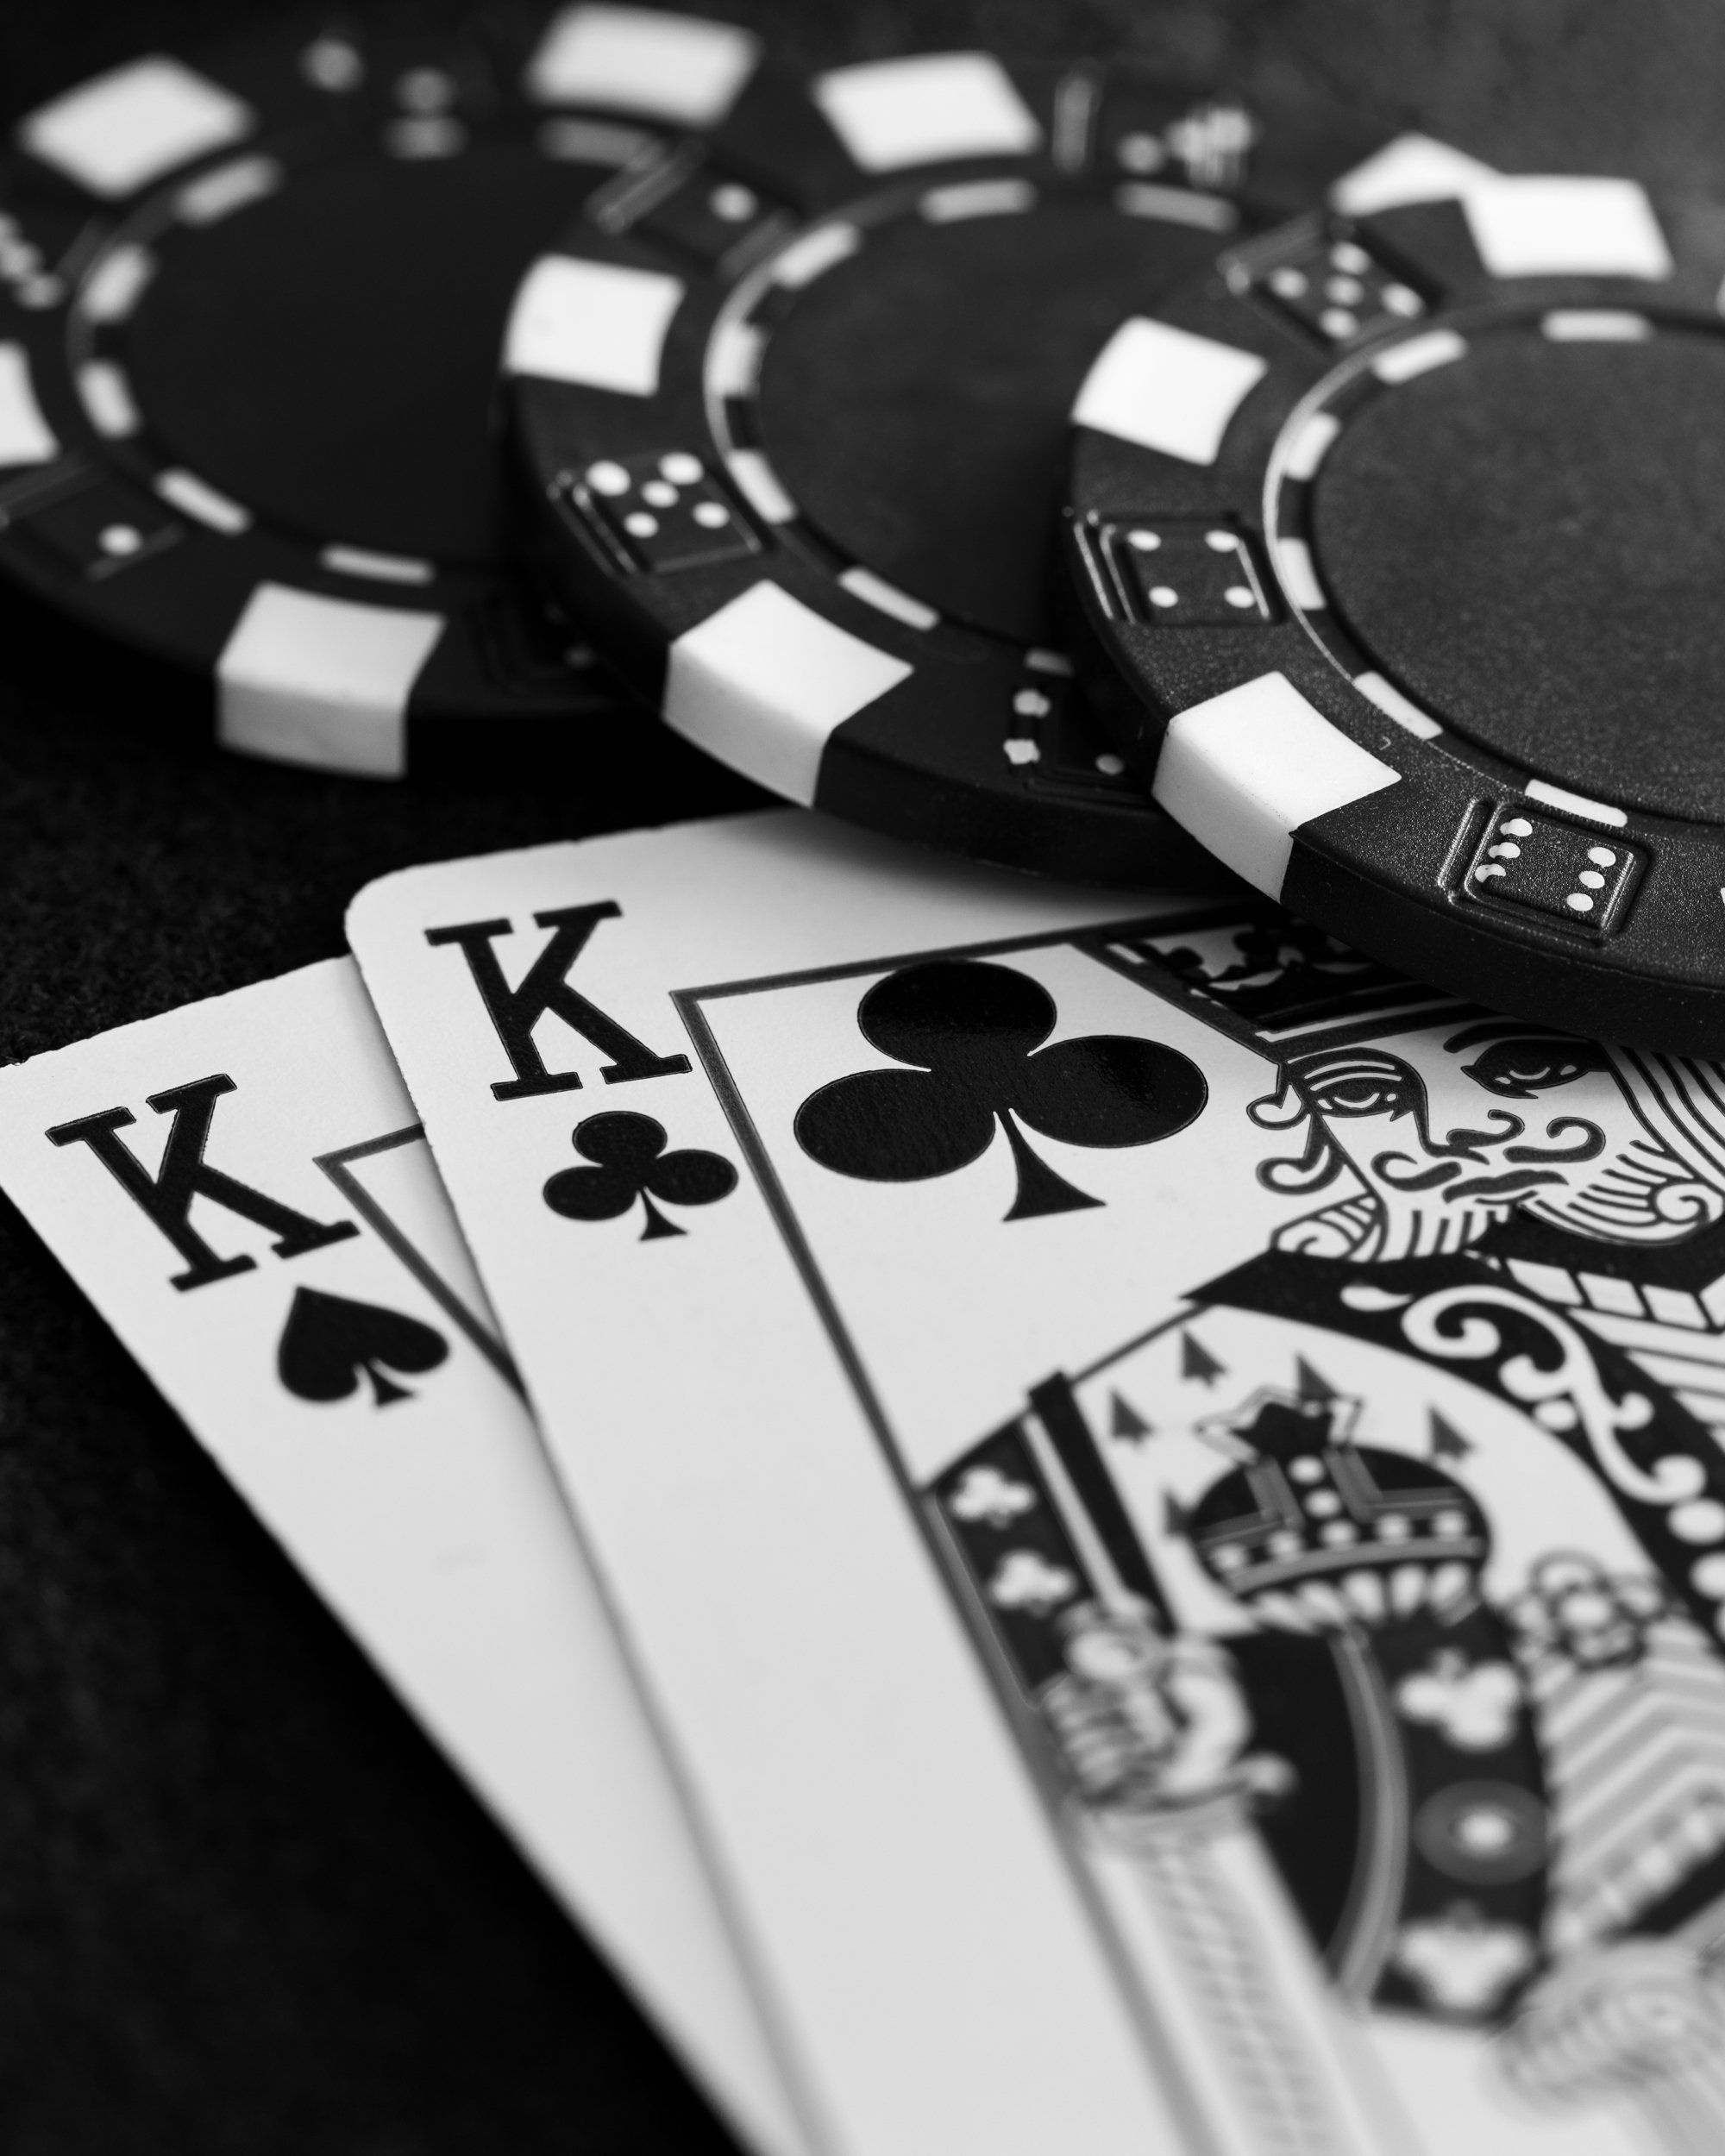 Poker: Cards, King-King, The second best Hold'em hand, Two kings, "Cowboys". 2000x2500 HD Wallpaper.